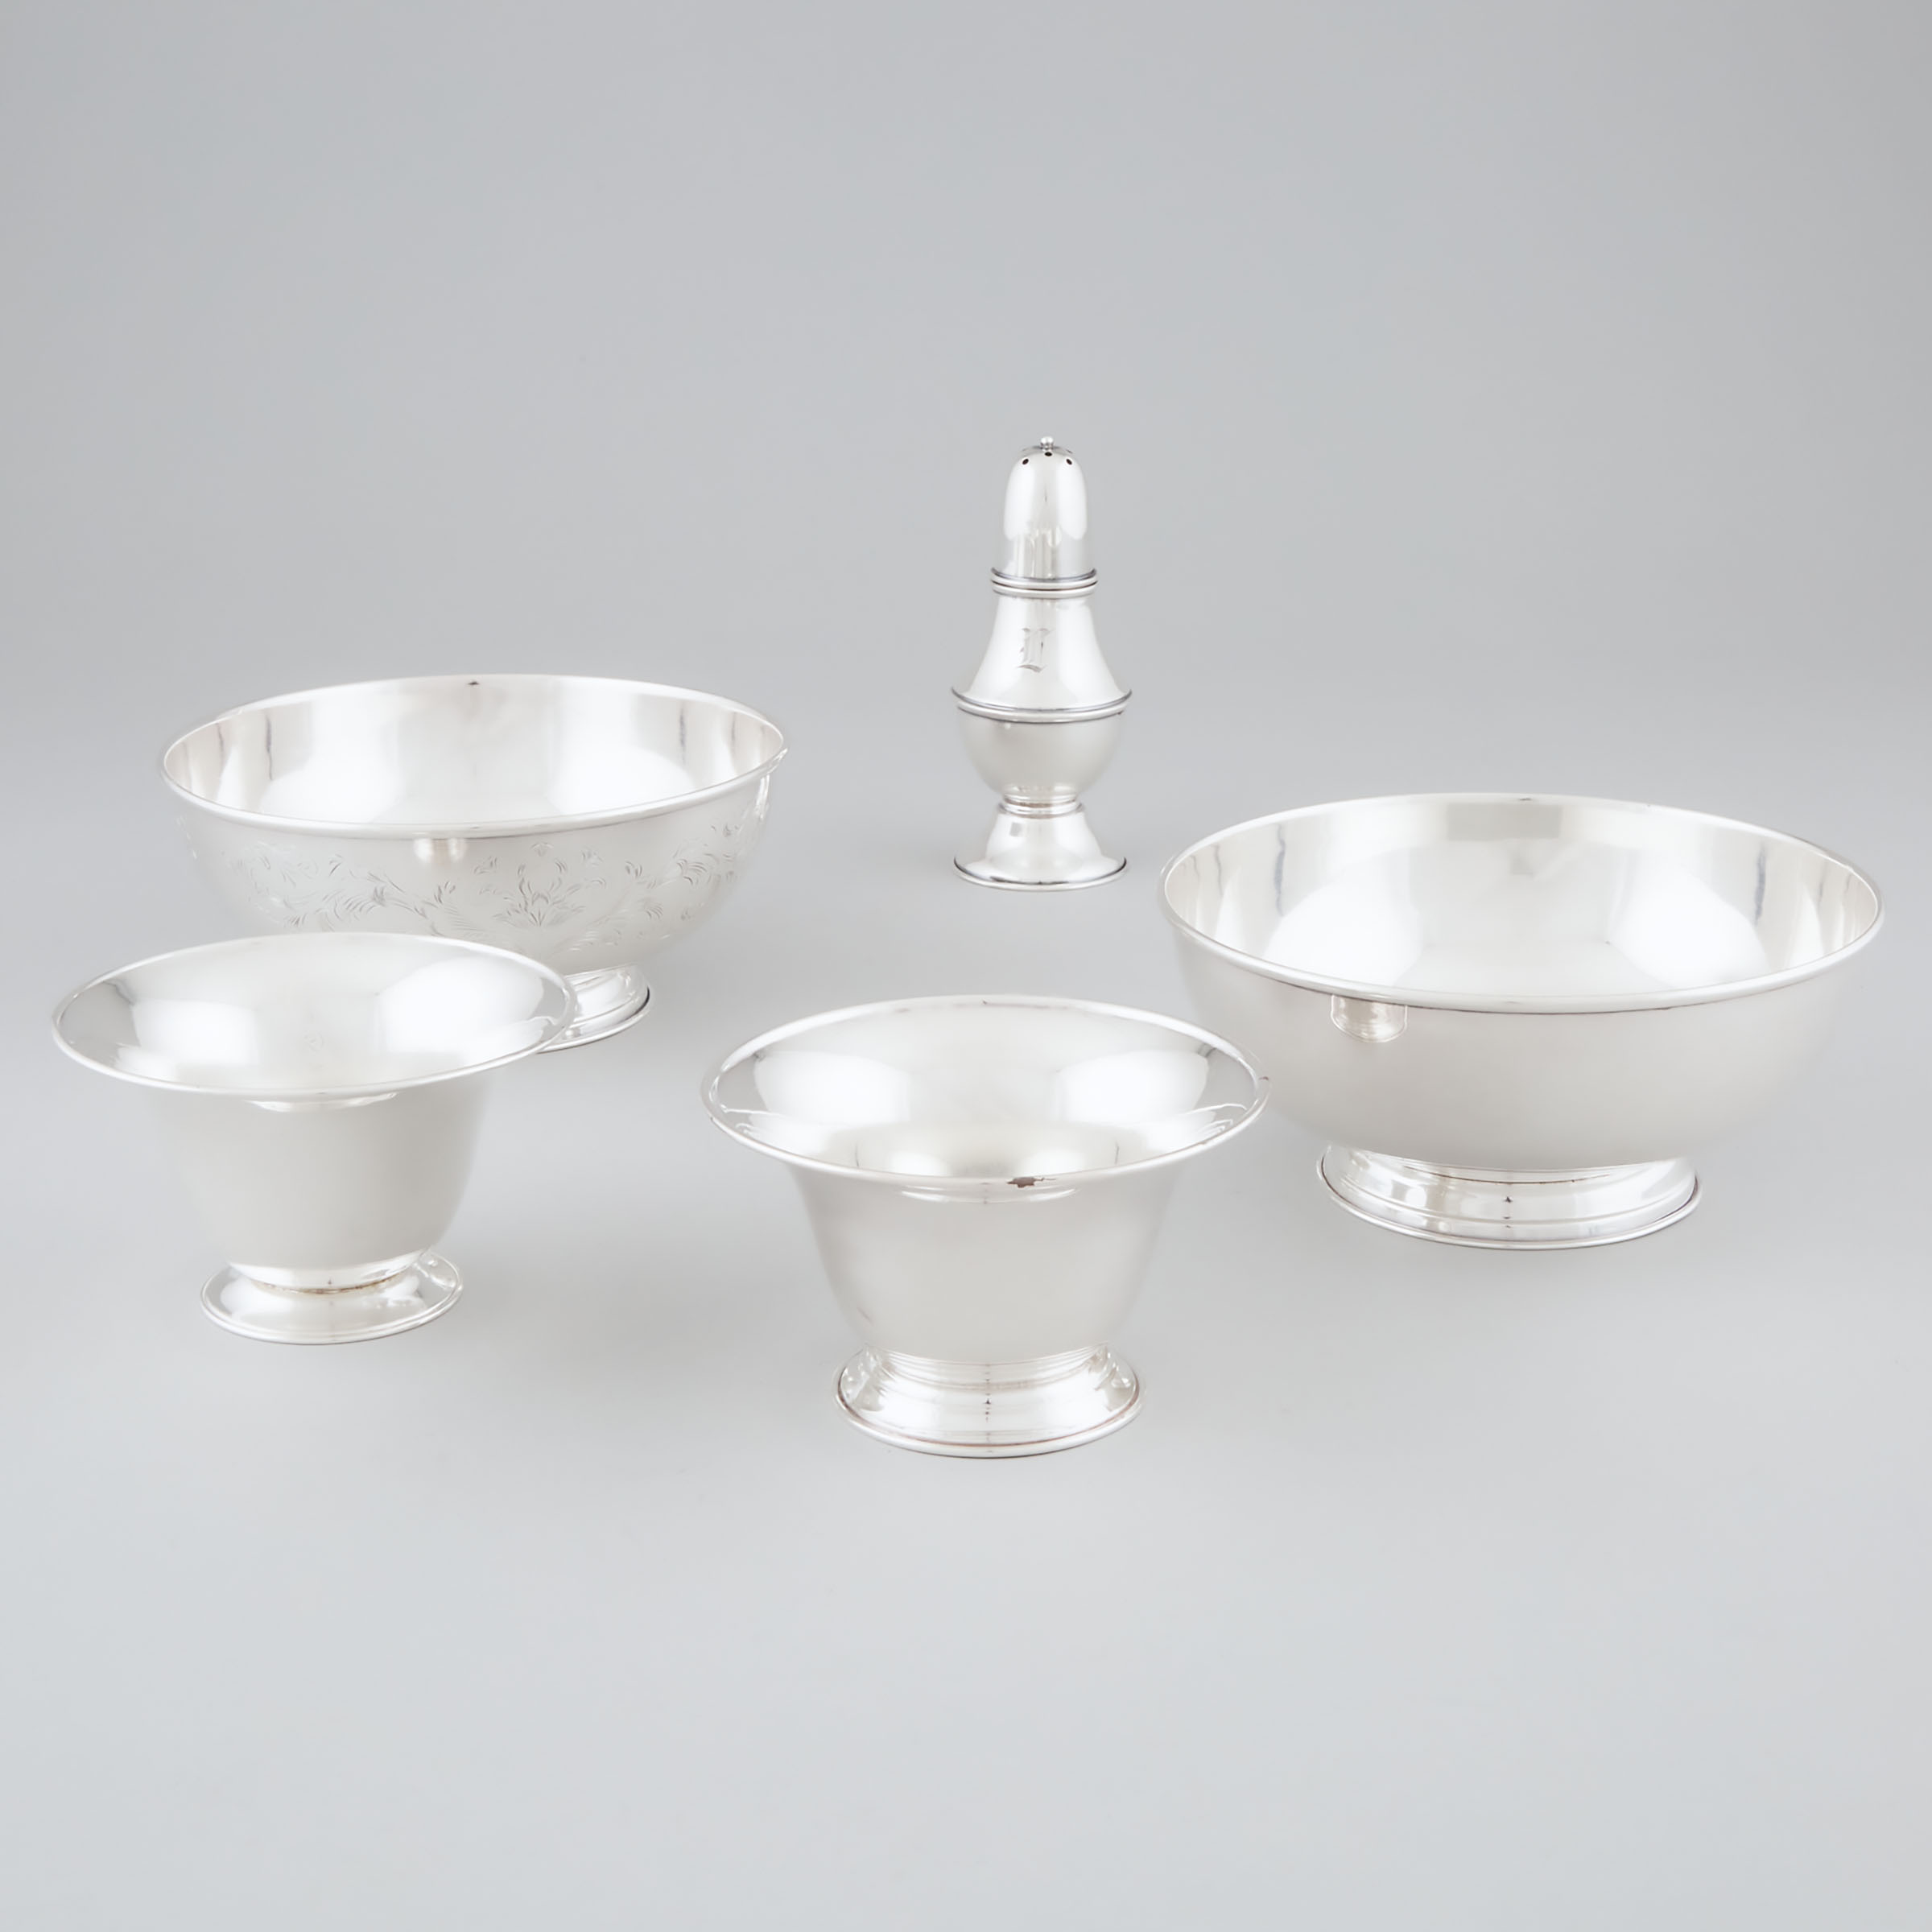 Four Canadian Silver Bowls and a Caster, Carl Poul Petersen, Montreal, Que., mid-20th century